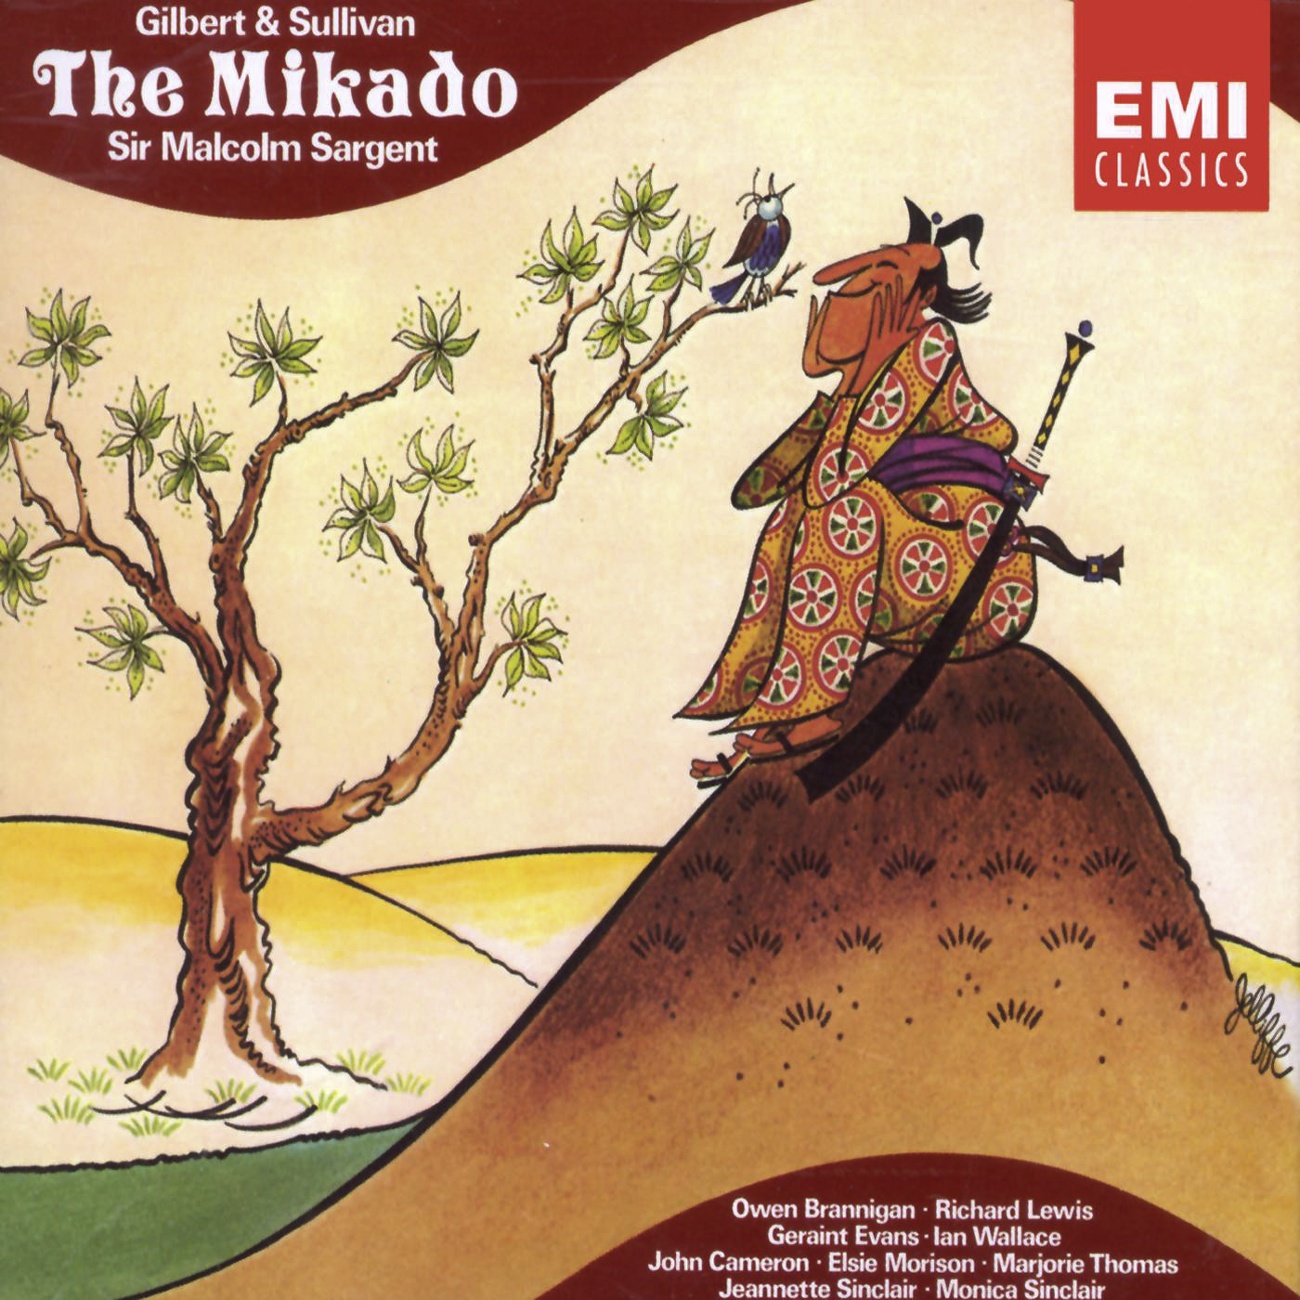 The Mikado (or, The Town of Titipu), Act I: Our great Mikado, virtuous man (Pish-Tush, Nobles)